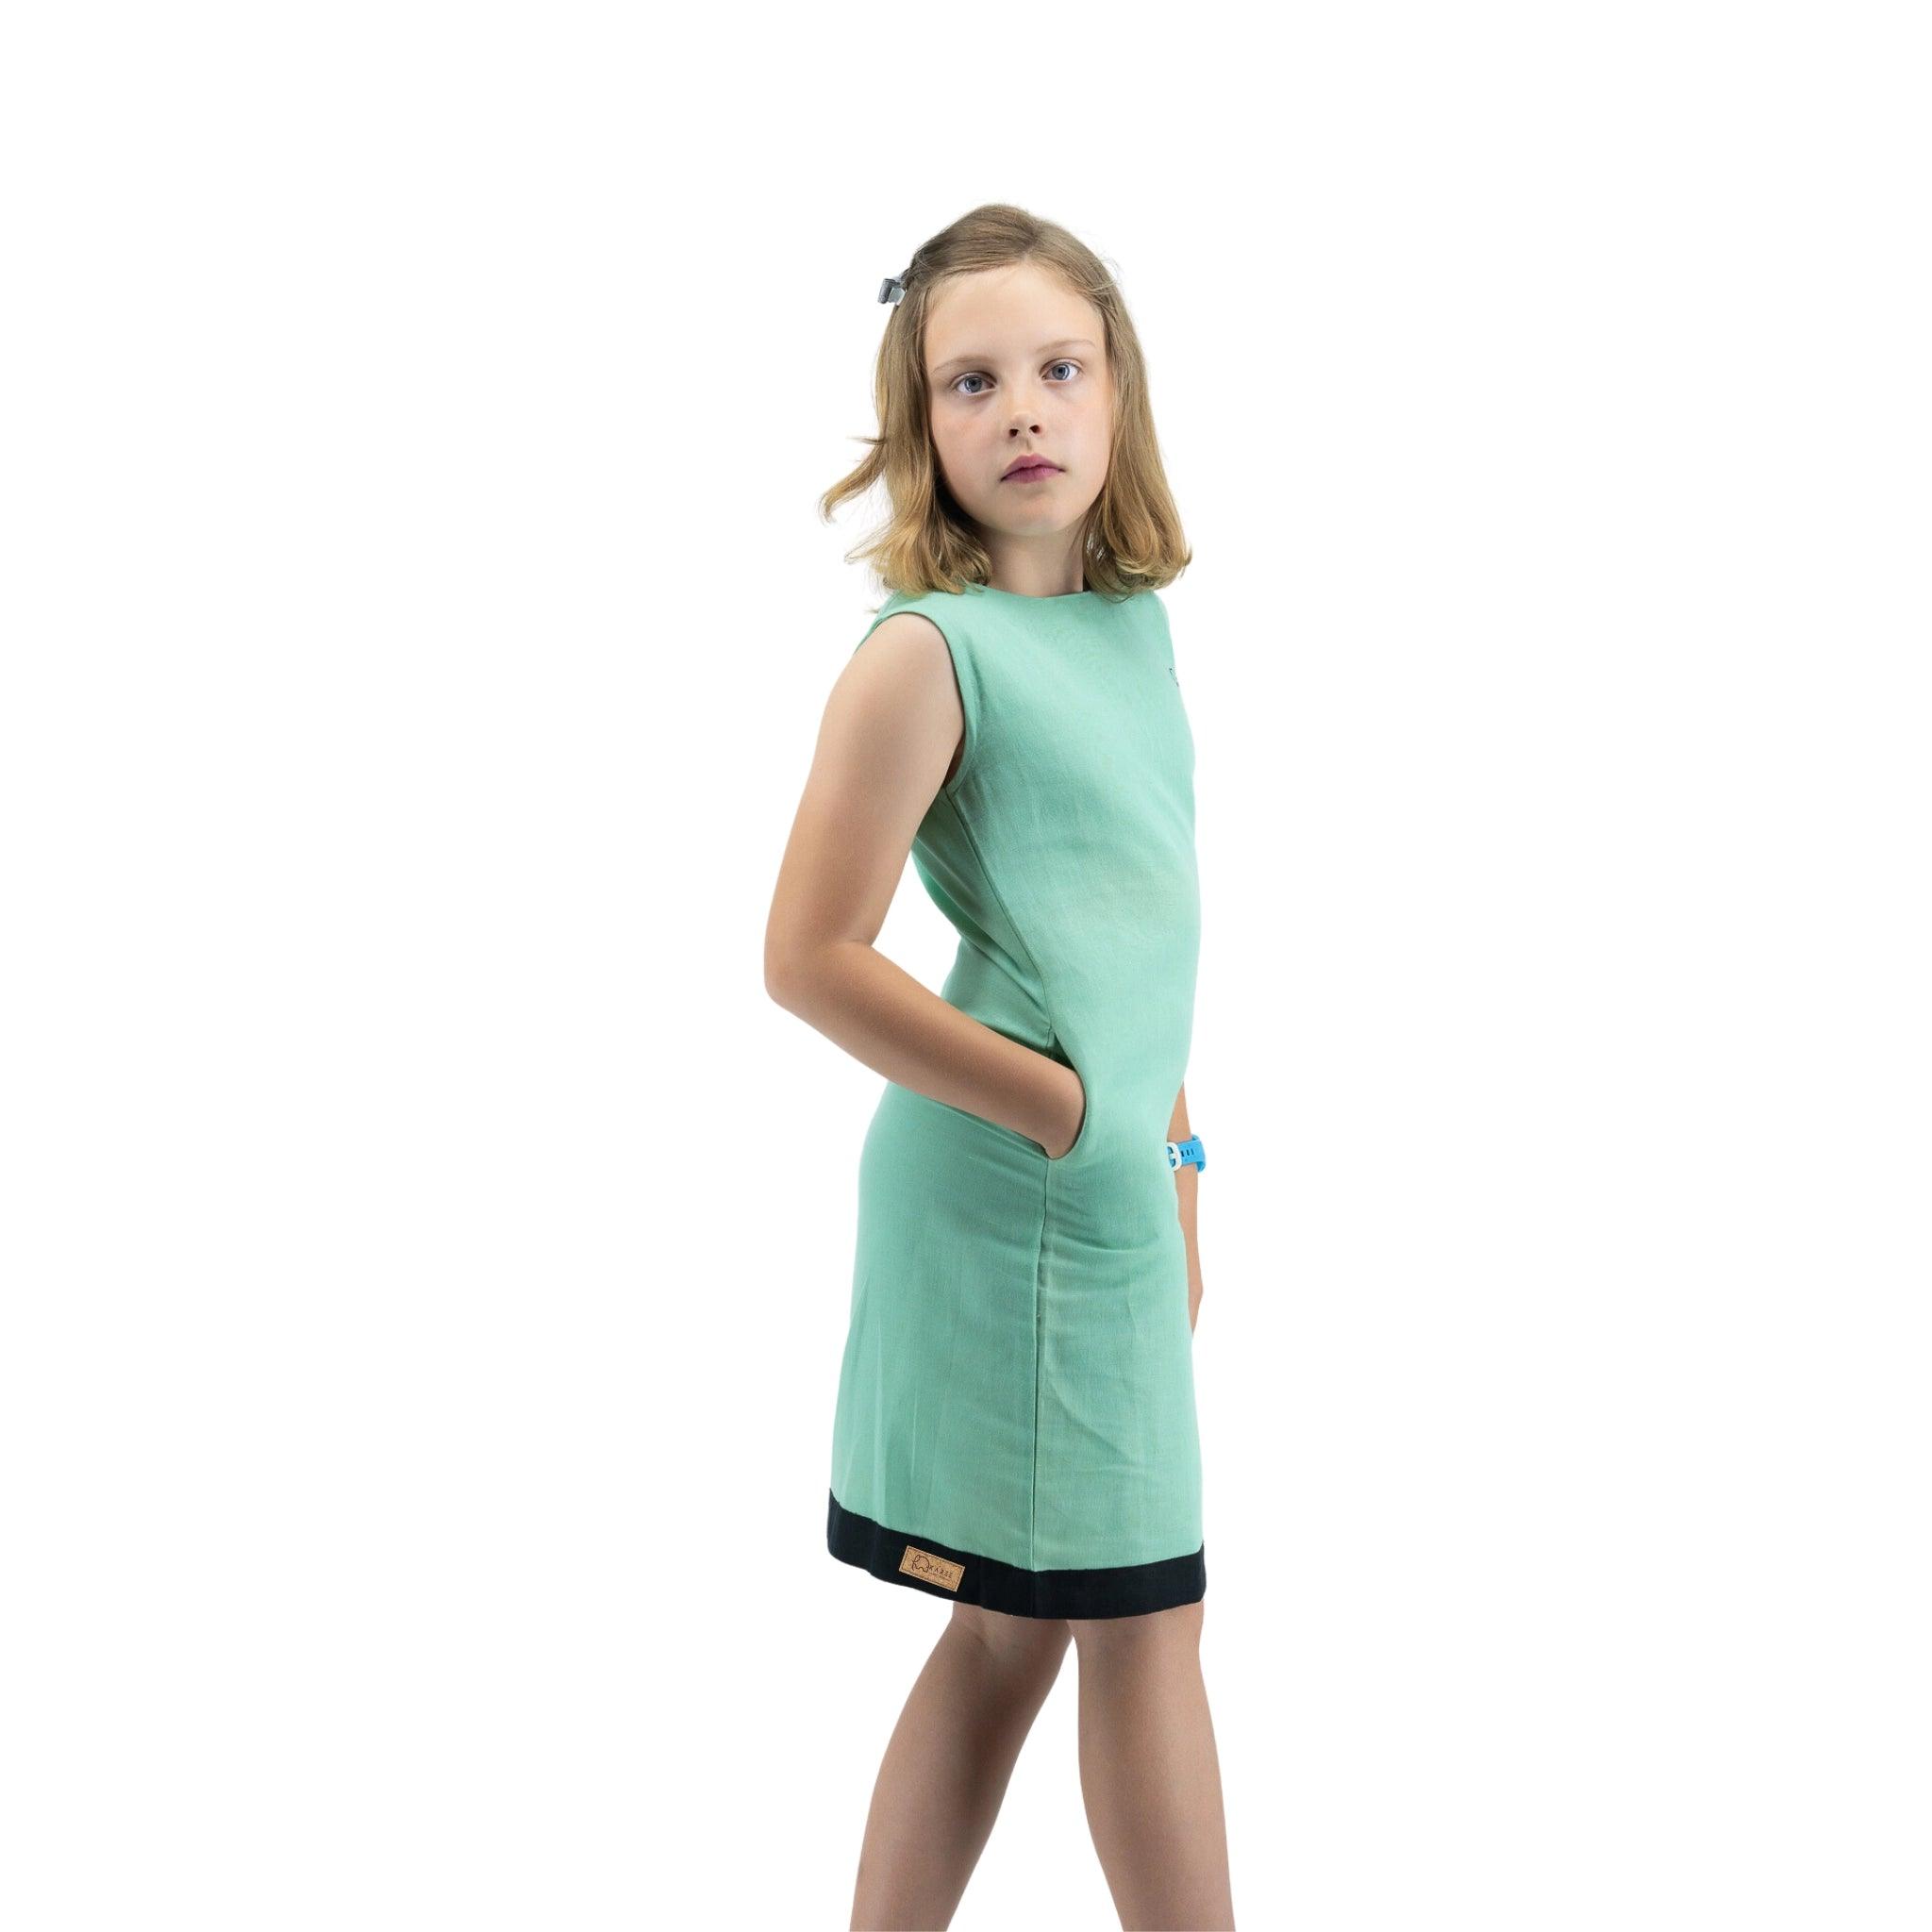 Young girl in a Karee Neptune Green Linen Cotton Round Neck Frock and sunglasses posing with hands on hips against a white background.